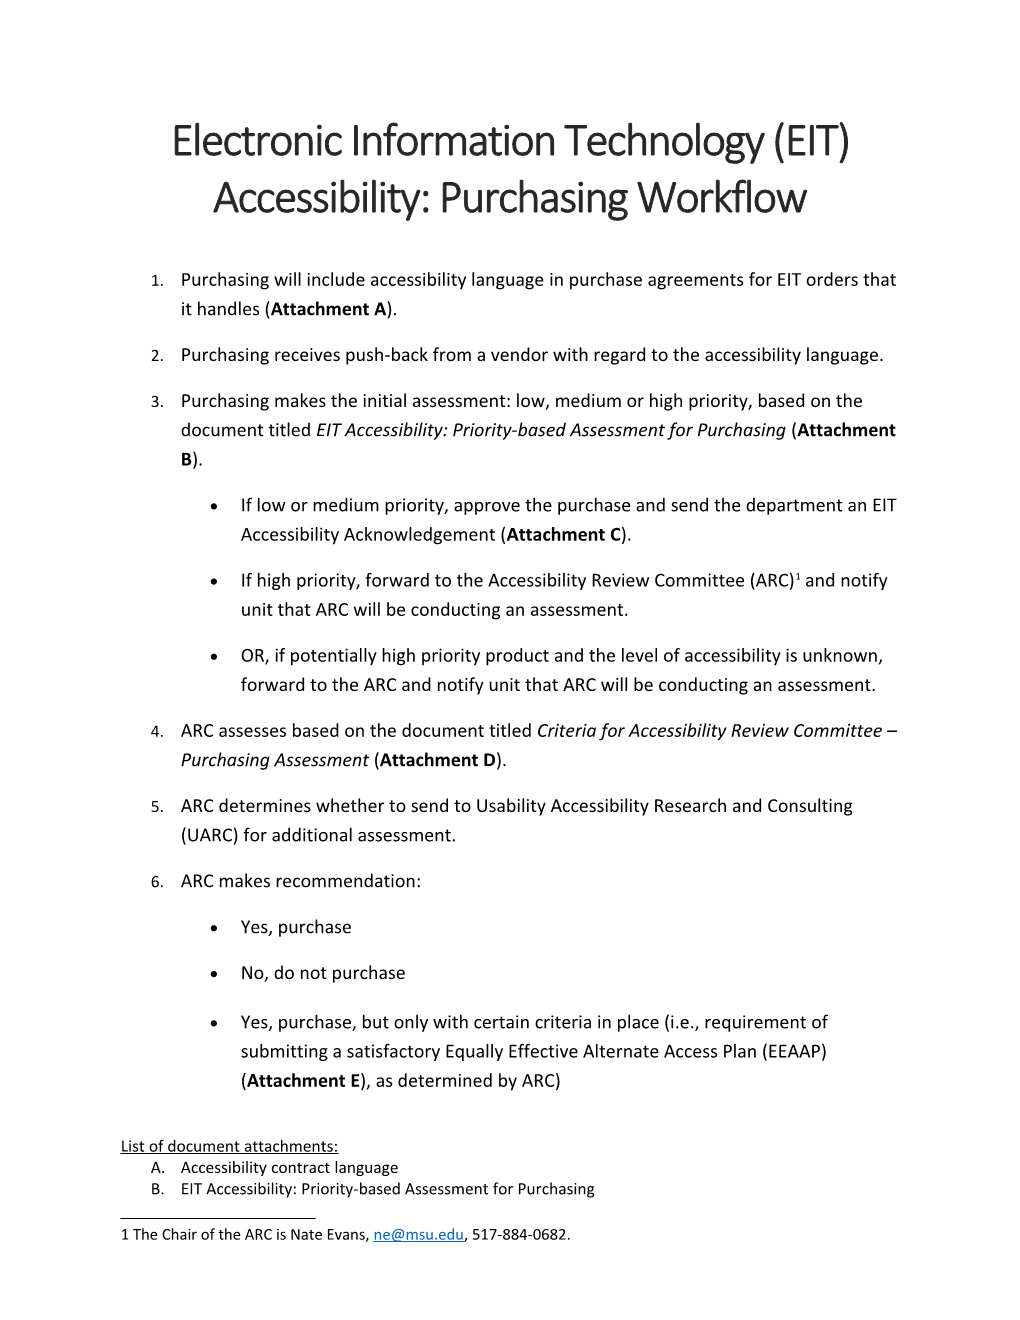 Electronic Information Technology (EIT)Accessibility: Purchasing Workflow